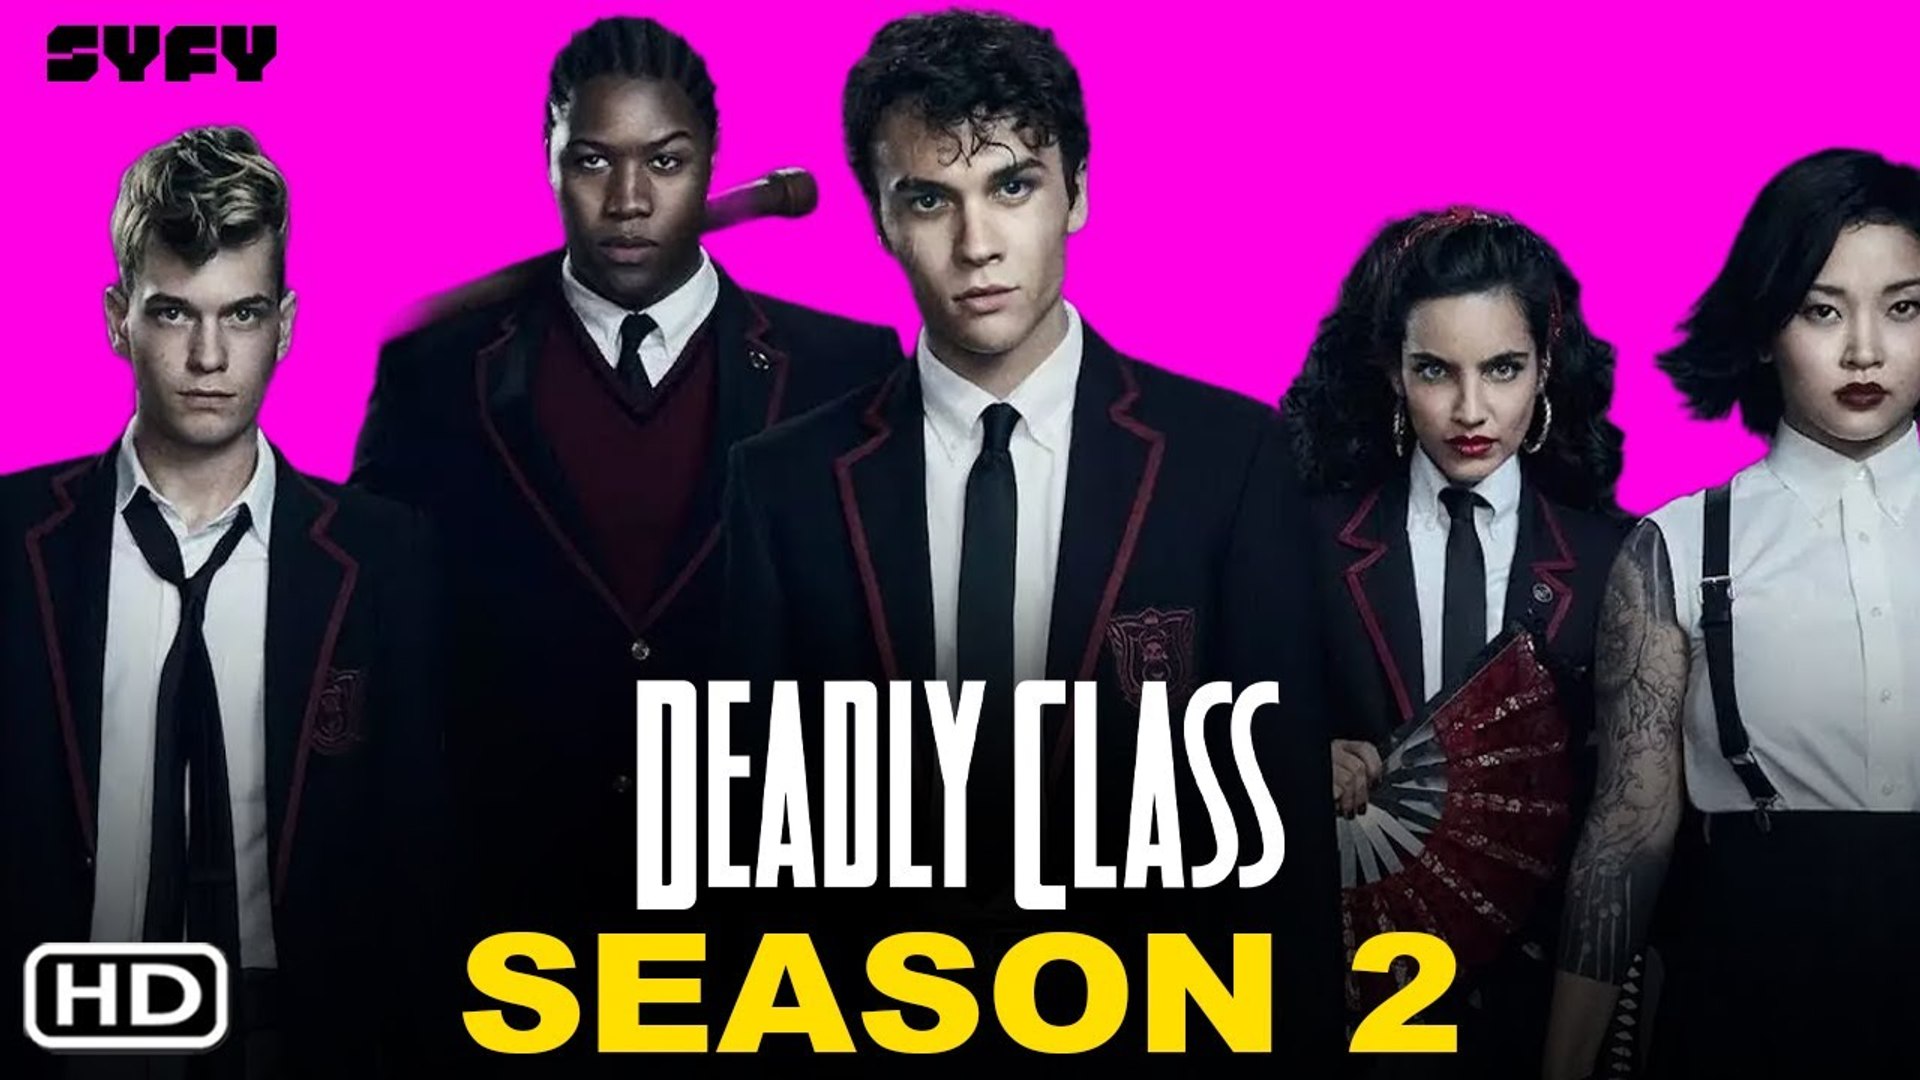 Deadly Class Season 2 Trailer - Syfy, Release Date, Cast, Episode 1, Review  - video Dailymotion